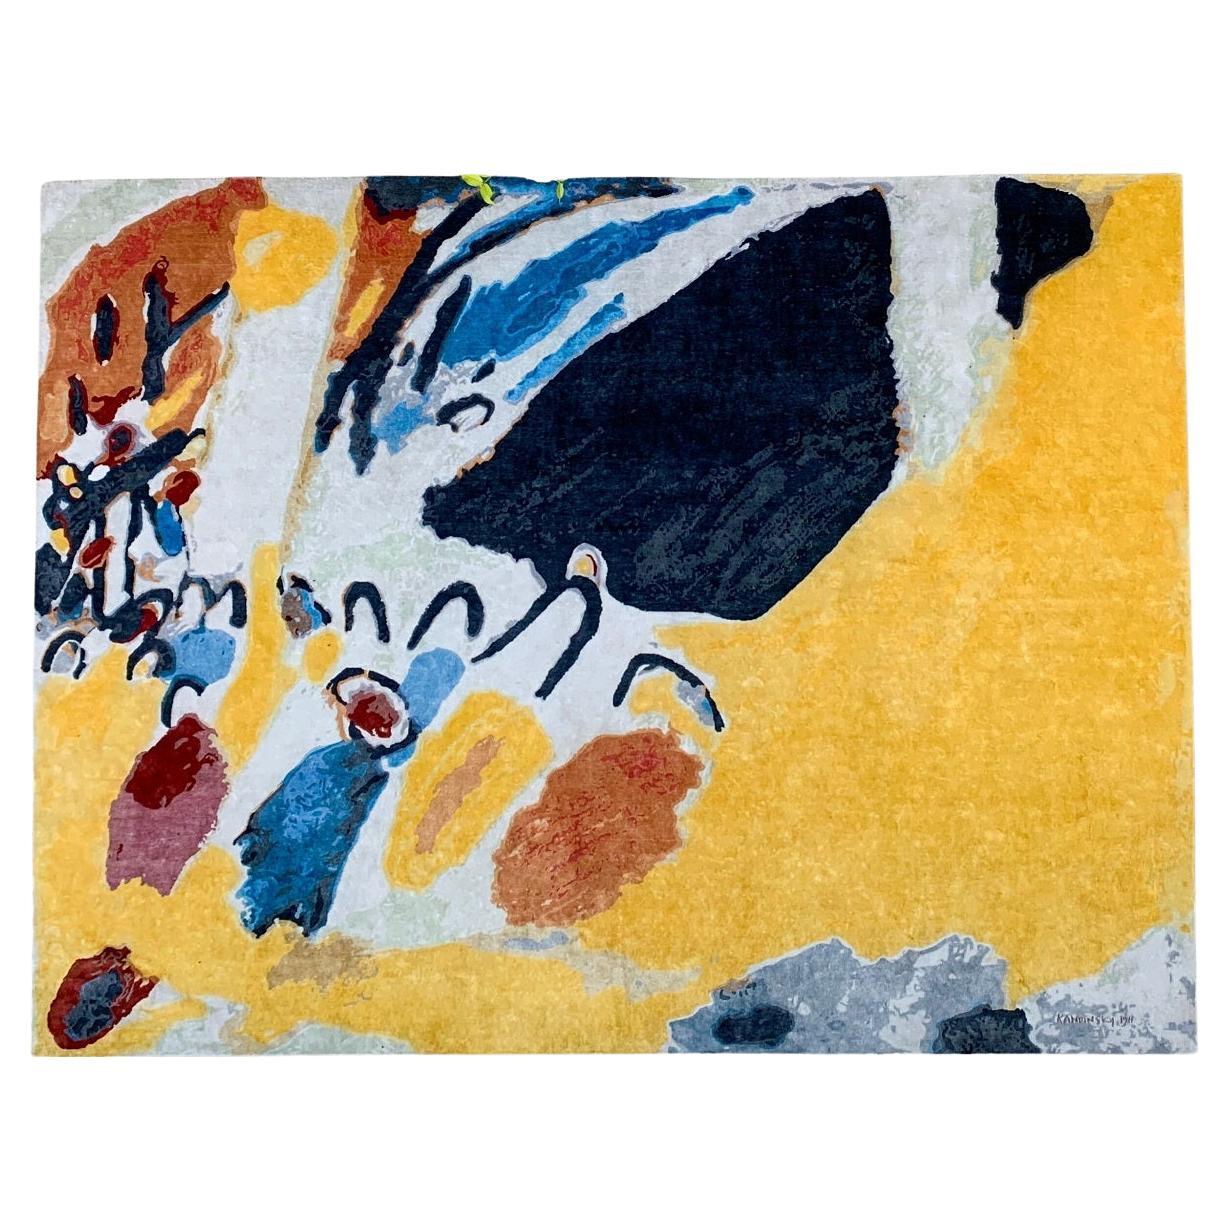 Custom Hand knotted Rug: “Impression III (Concert)" After Wassily Kandinsky